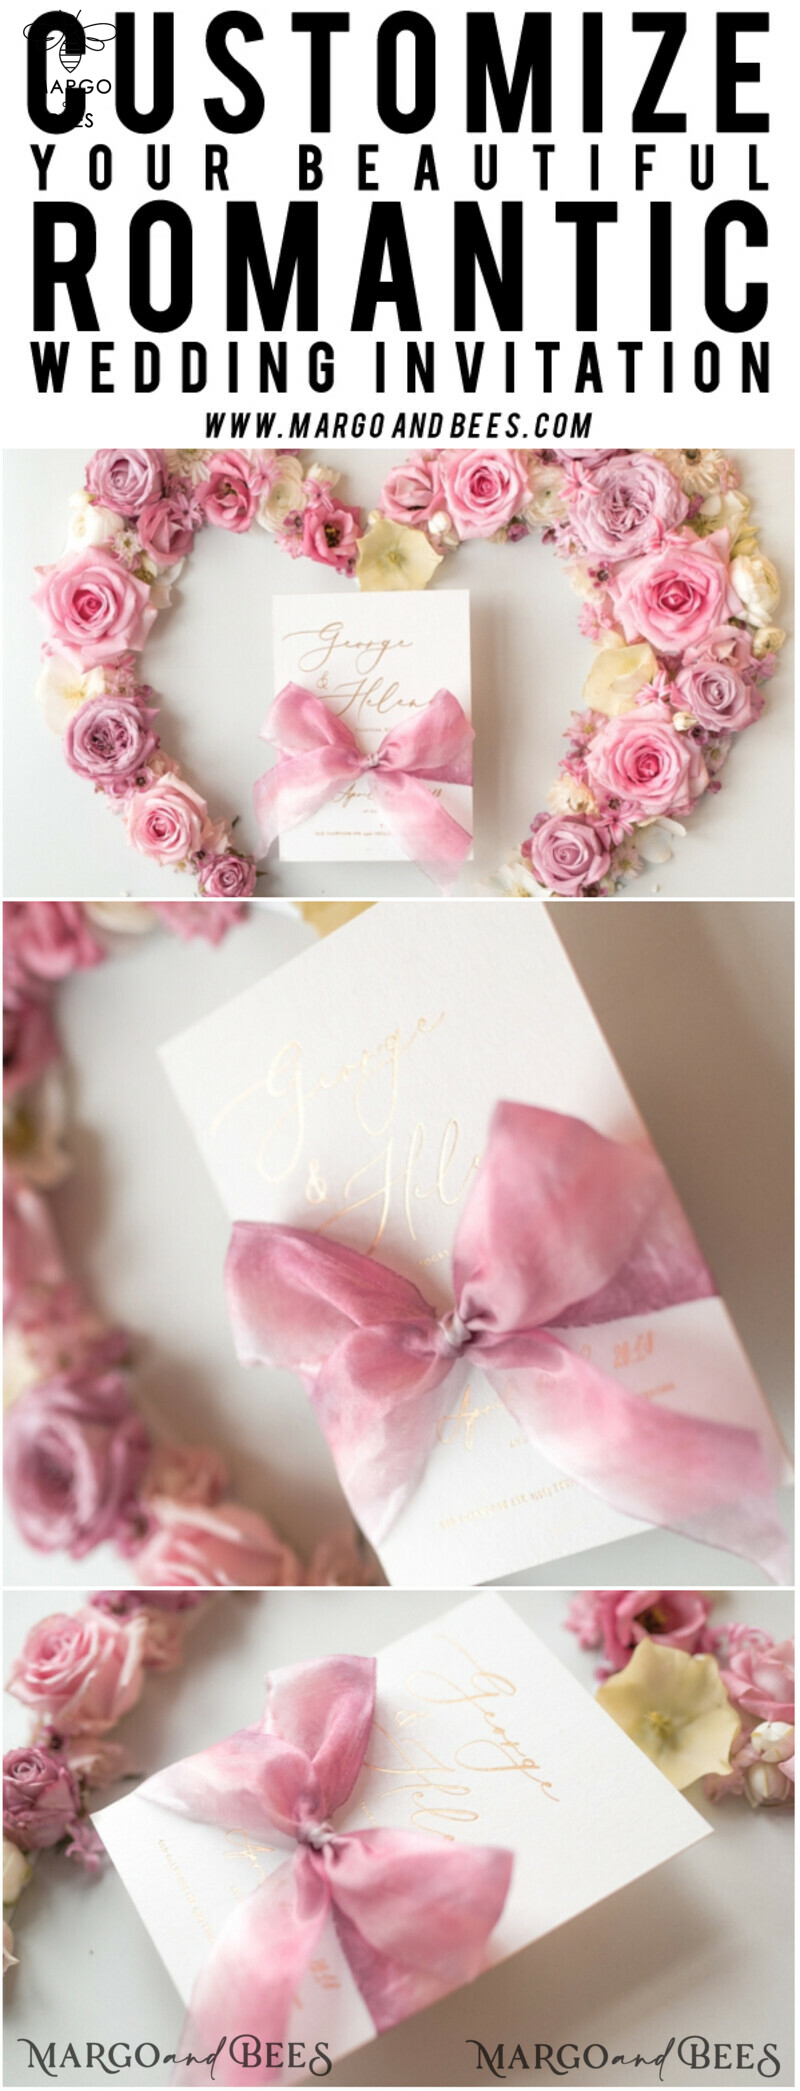 Elegant Personalized Wedding Invitations Romantic Stationery with Vintage Garden Roses and  Handmade Silk Bow Gold Foil Letters  Blush Pink Envelope -52